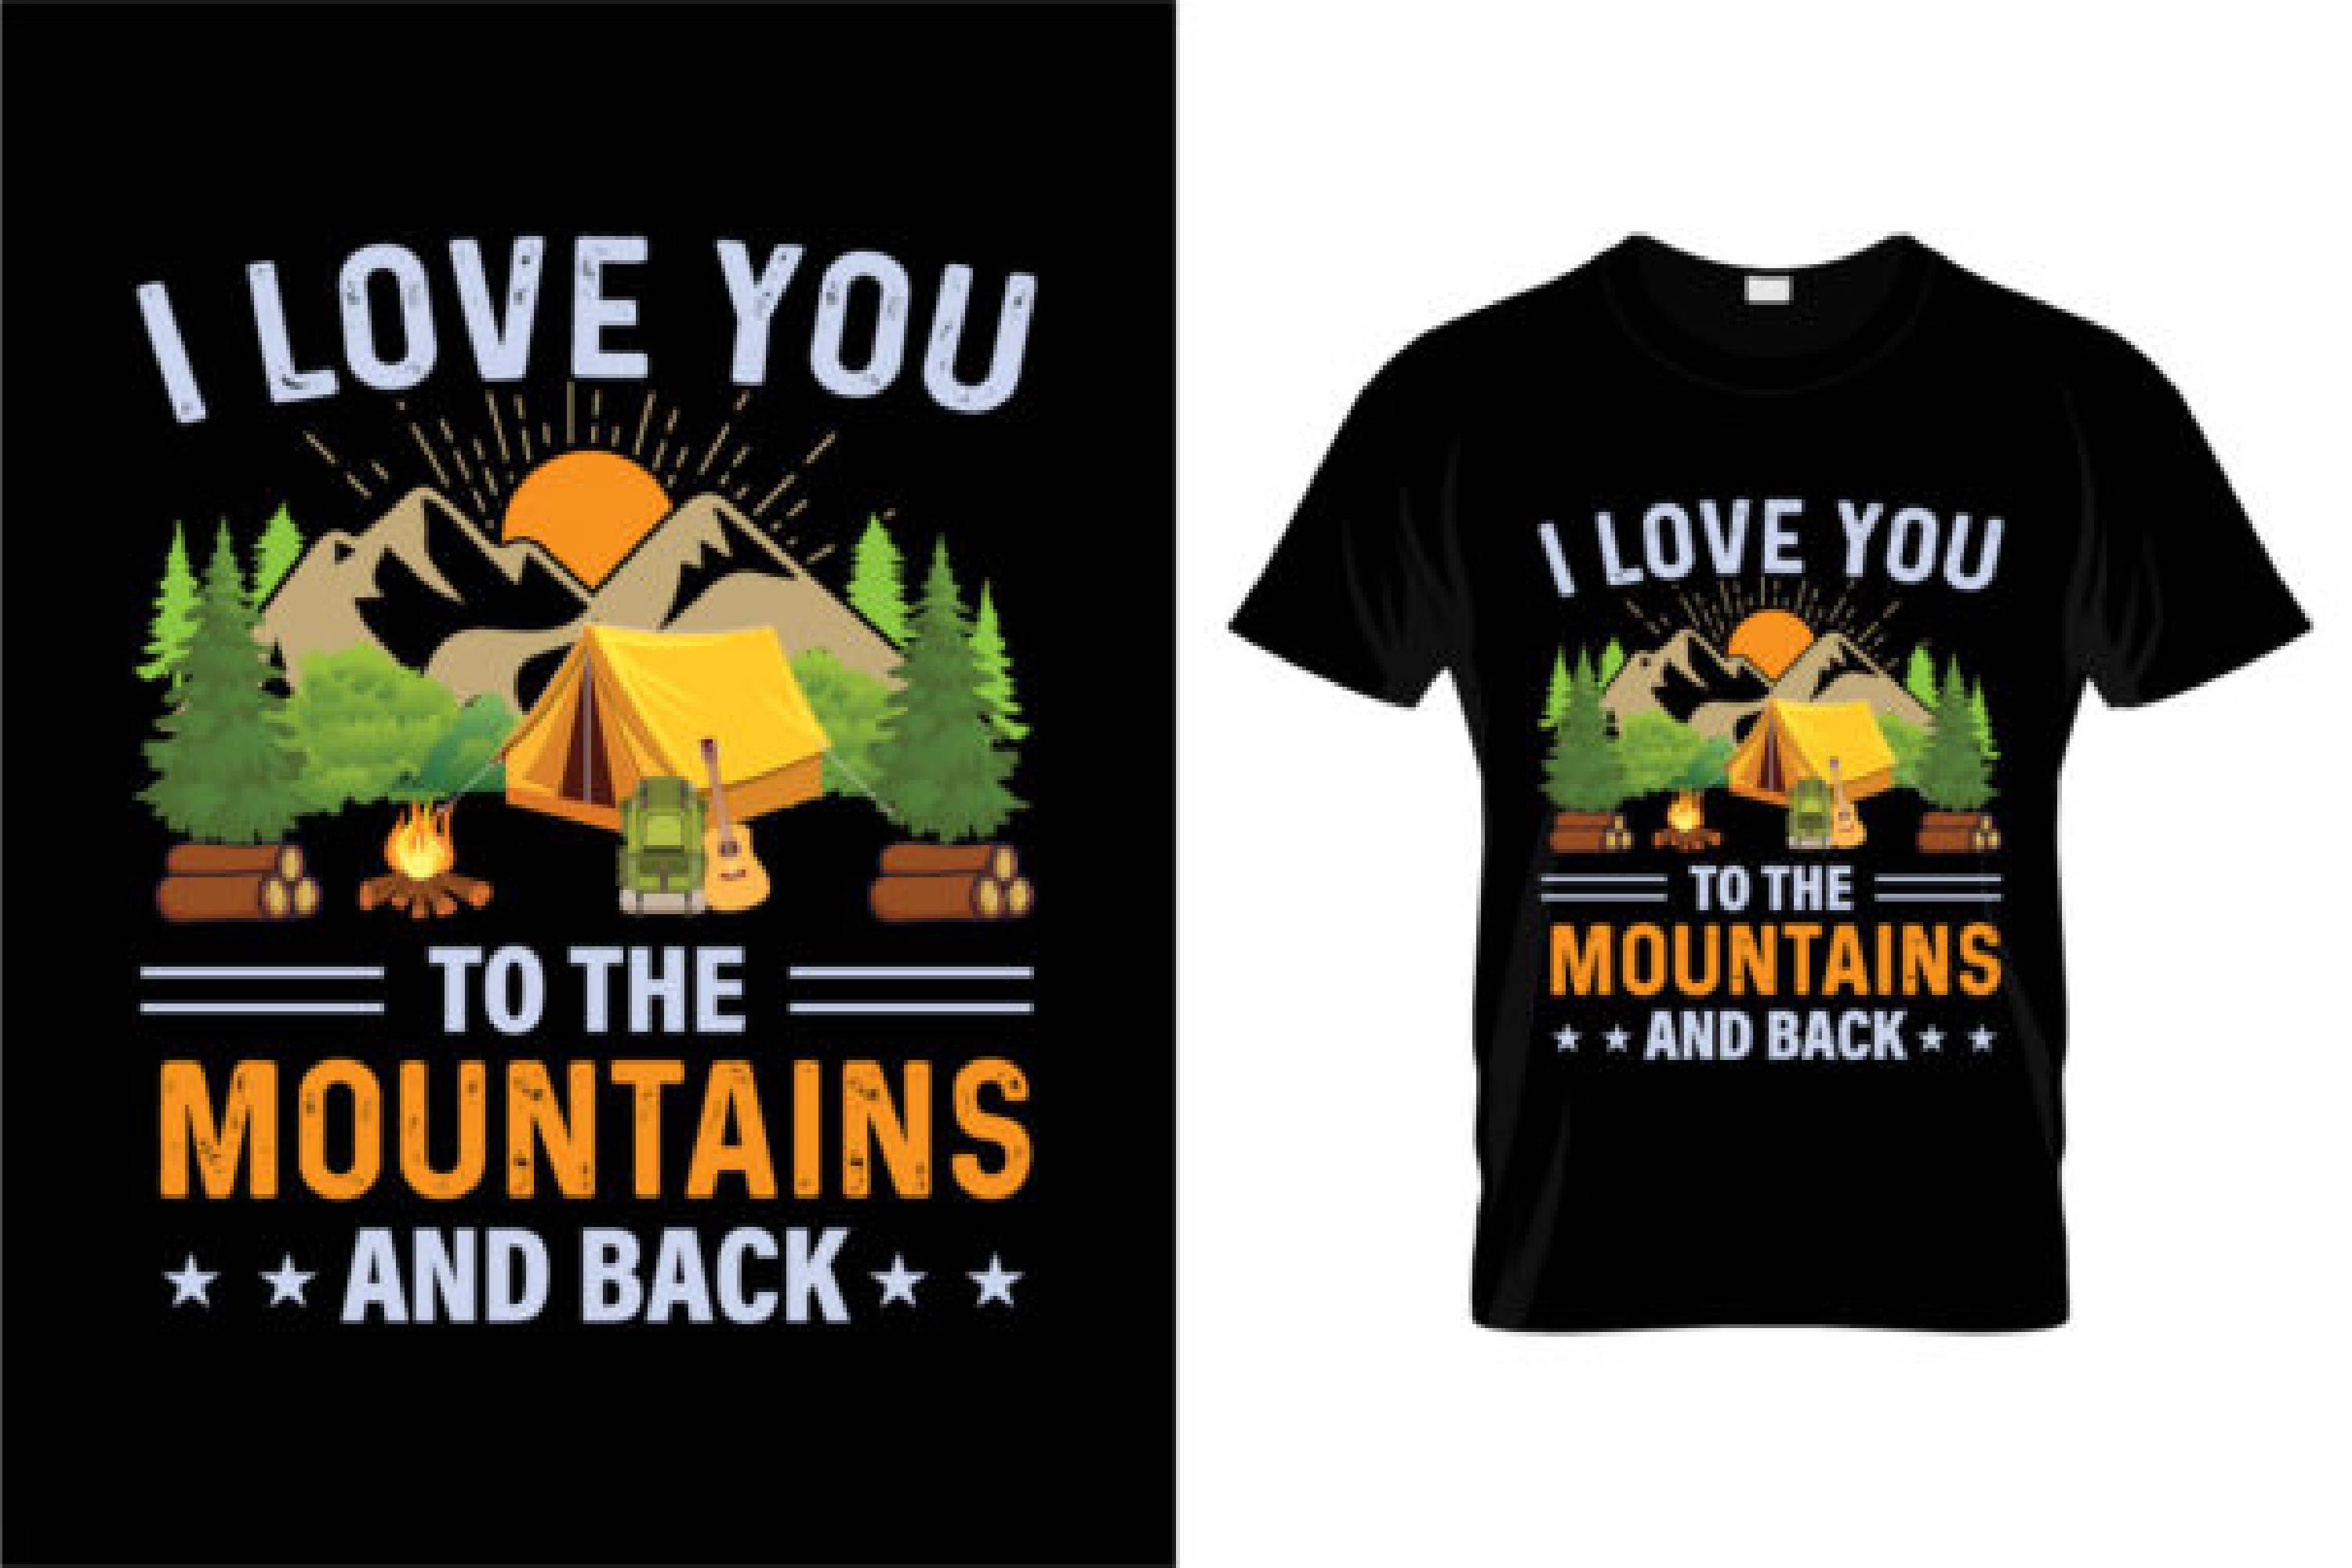 Image of a black T-shirt with a wonderful print on the theme of camping.